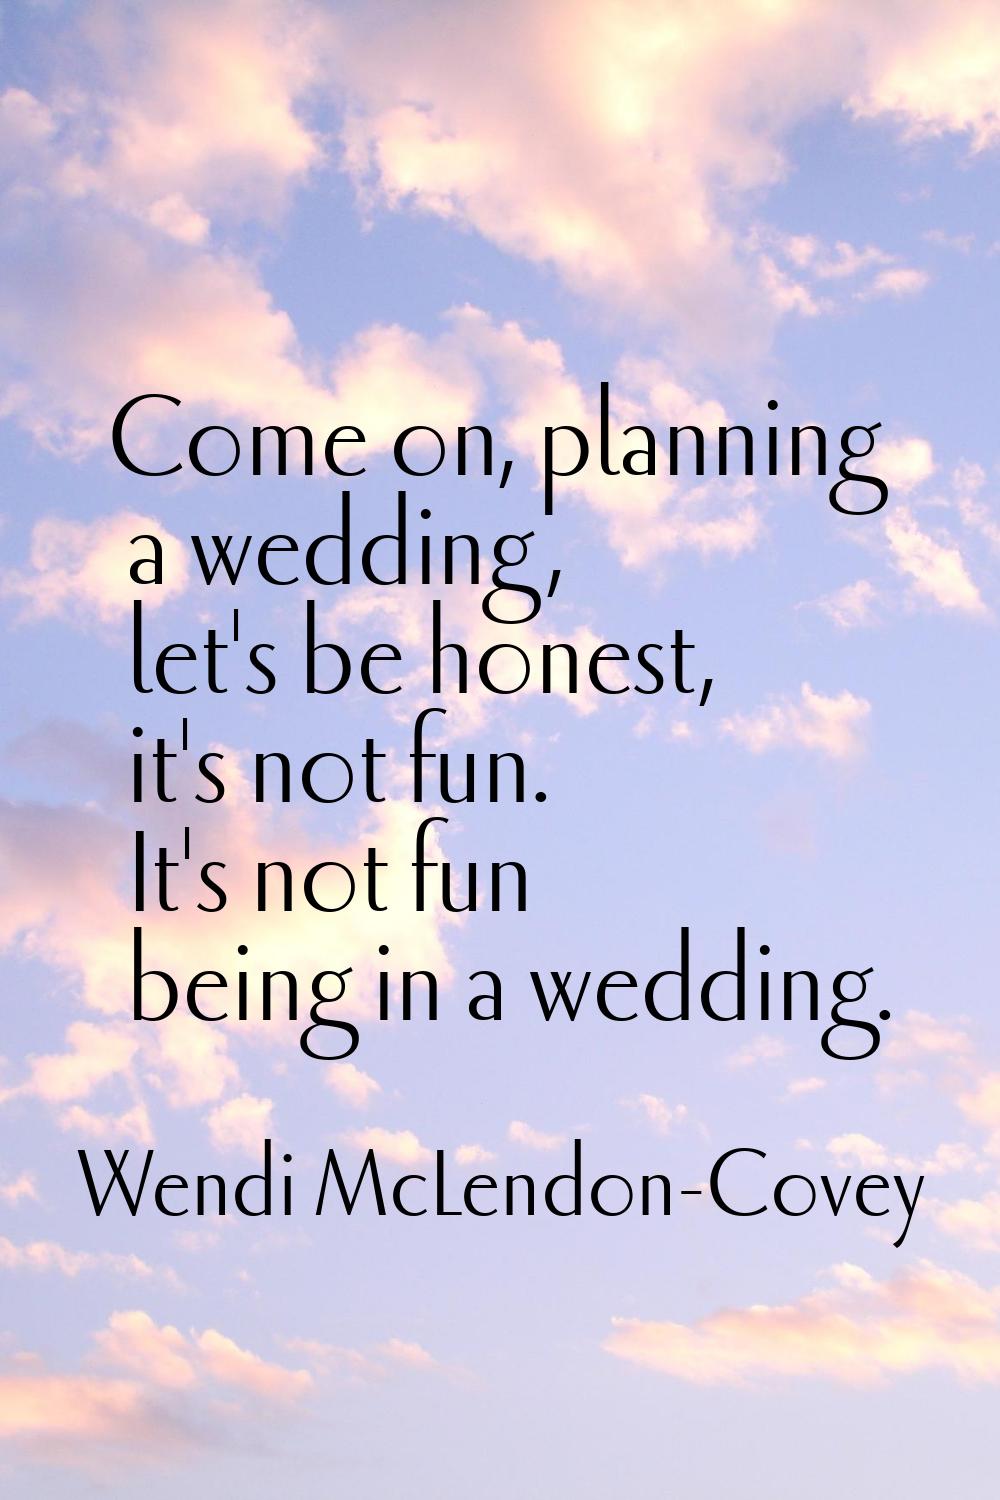 Come on, planning a wedding, let's be honest, it's not fun. It's not fun being in a wedding.